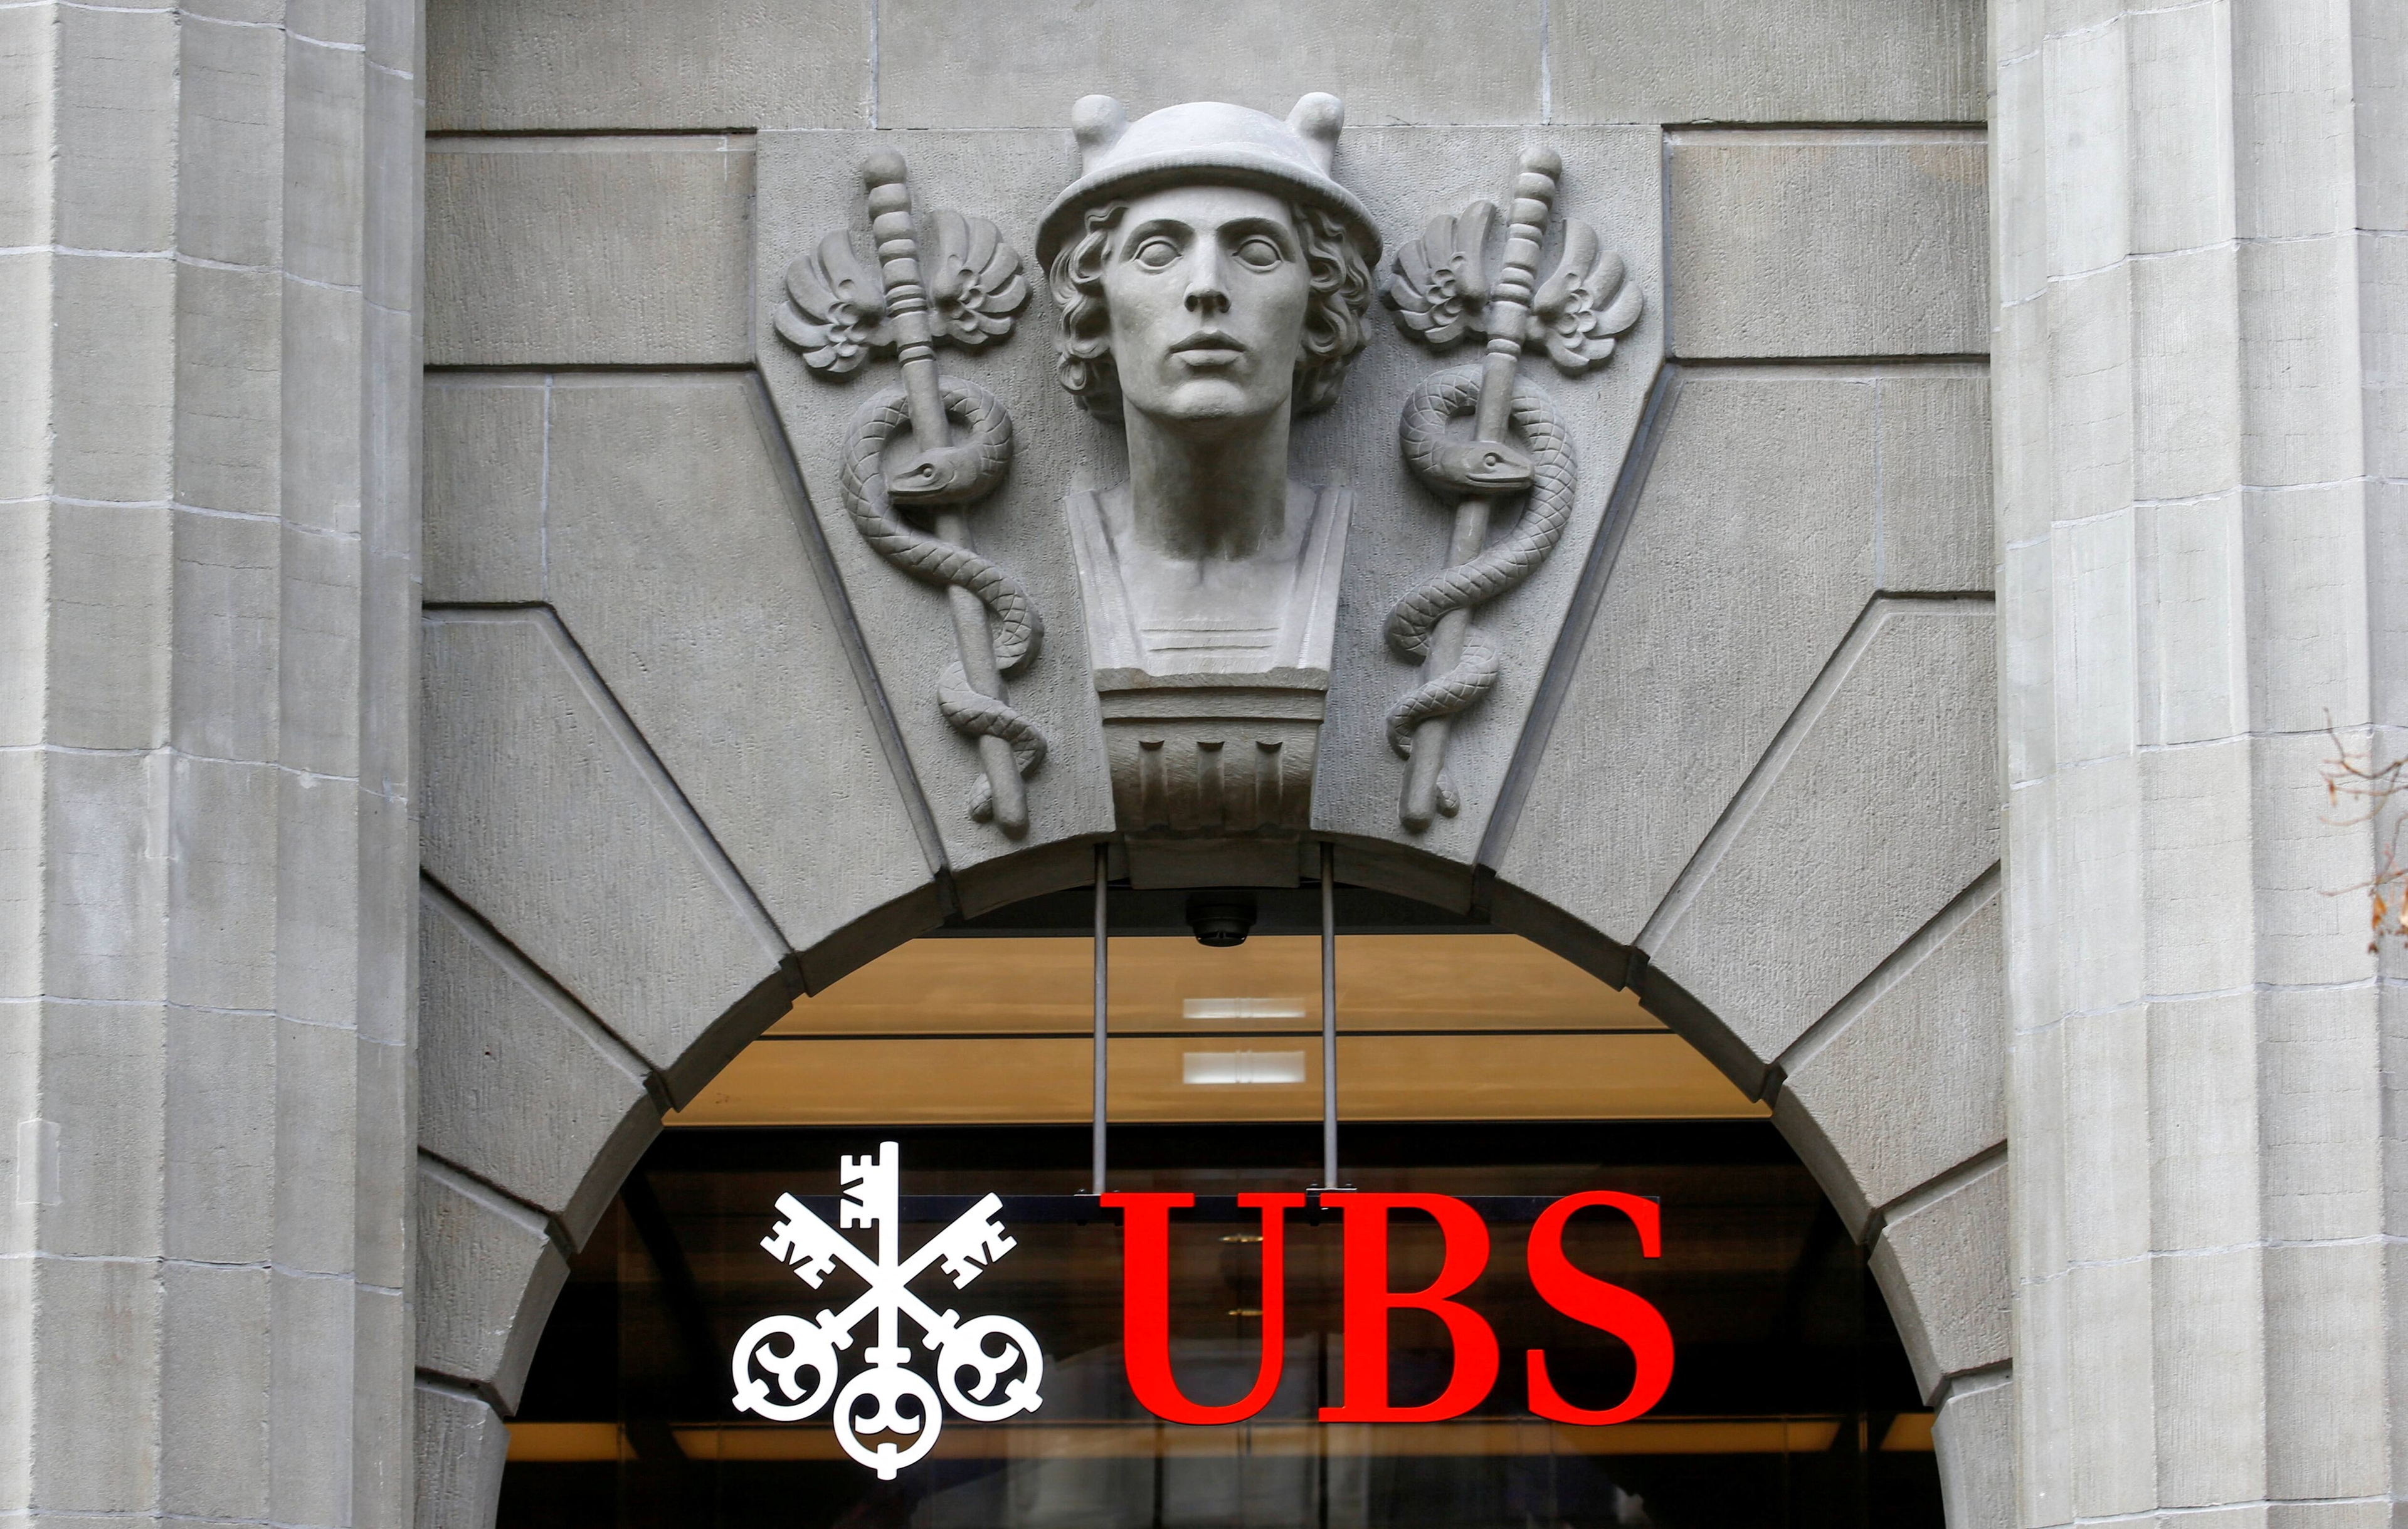 UBS cut India's 2022-23 economic growth forecast by 70 basis points to 7 percent on Friday, citing slowing global growth due to high commodity prices, and weak local demand because of energy price hikes, inflationary pressures and a struggling labour market.